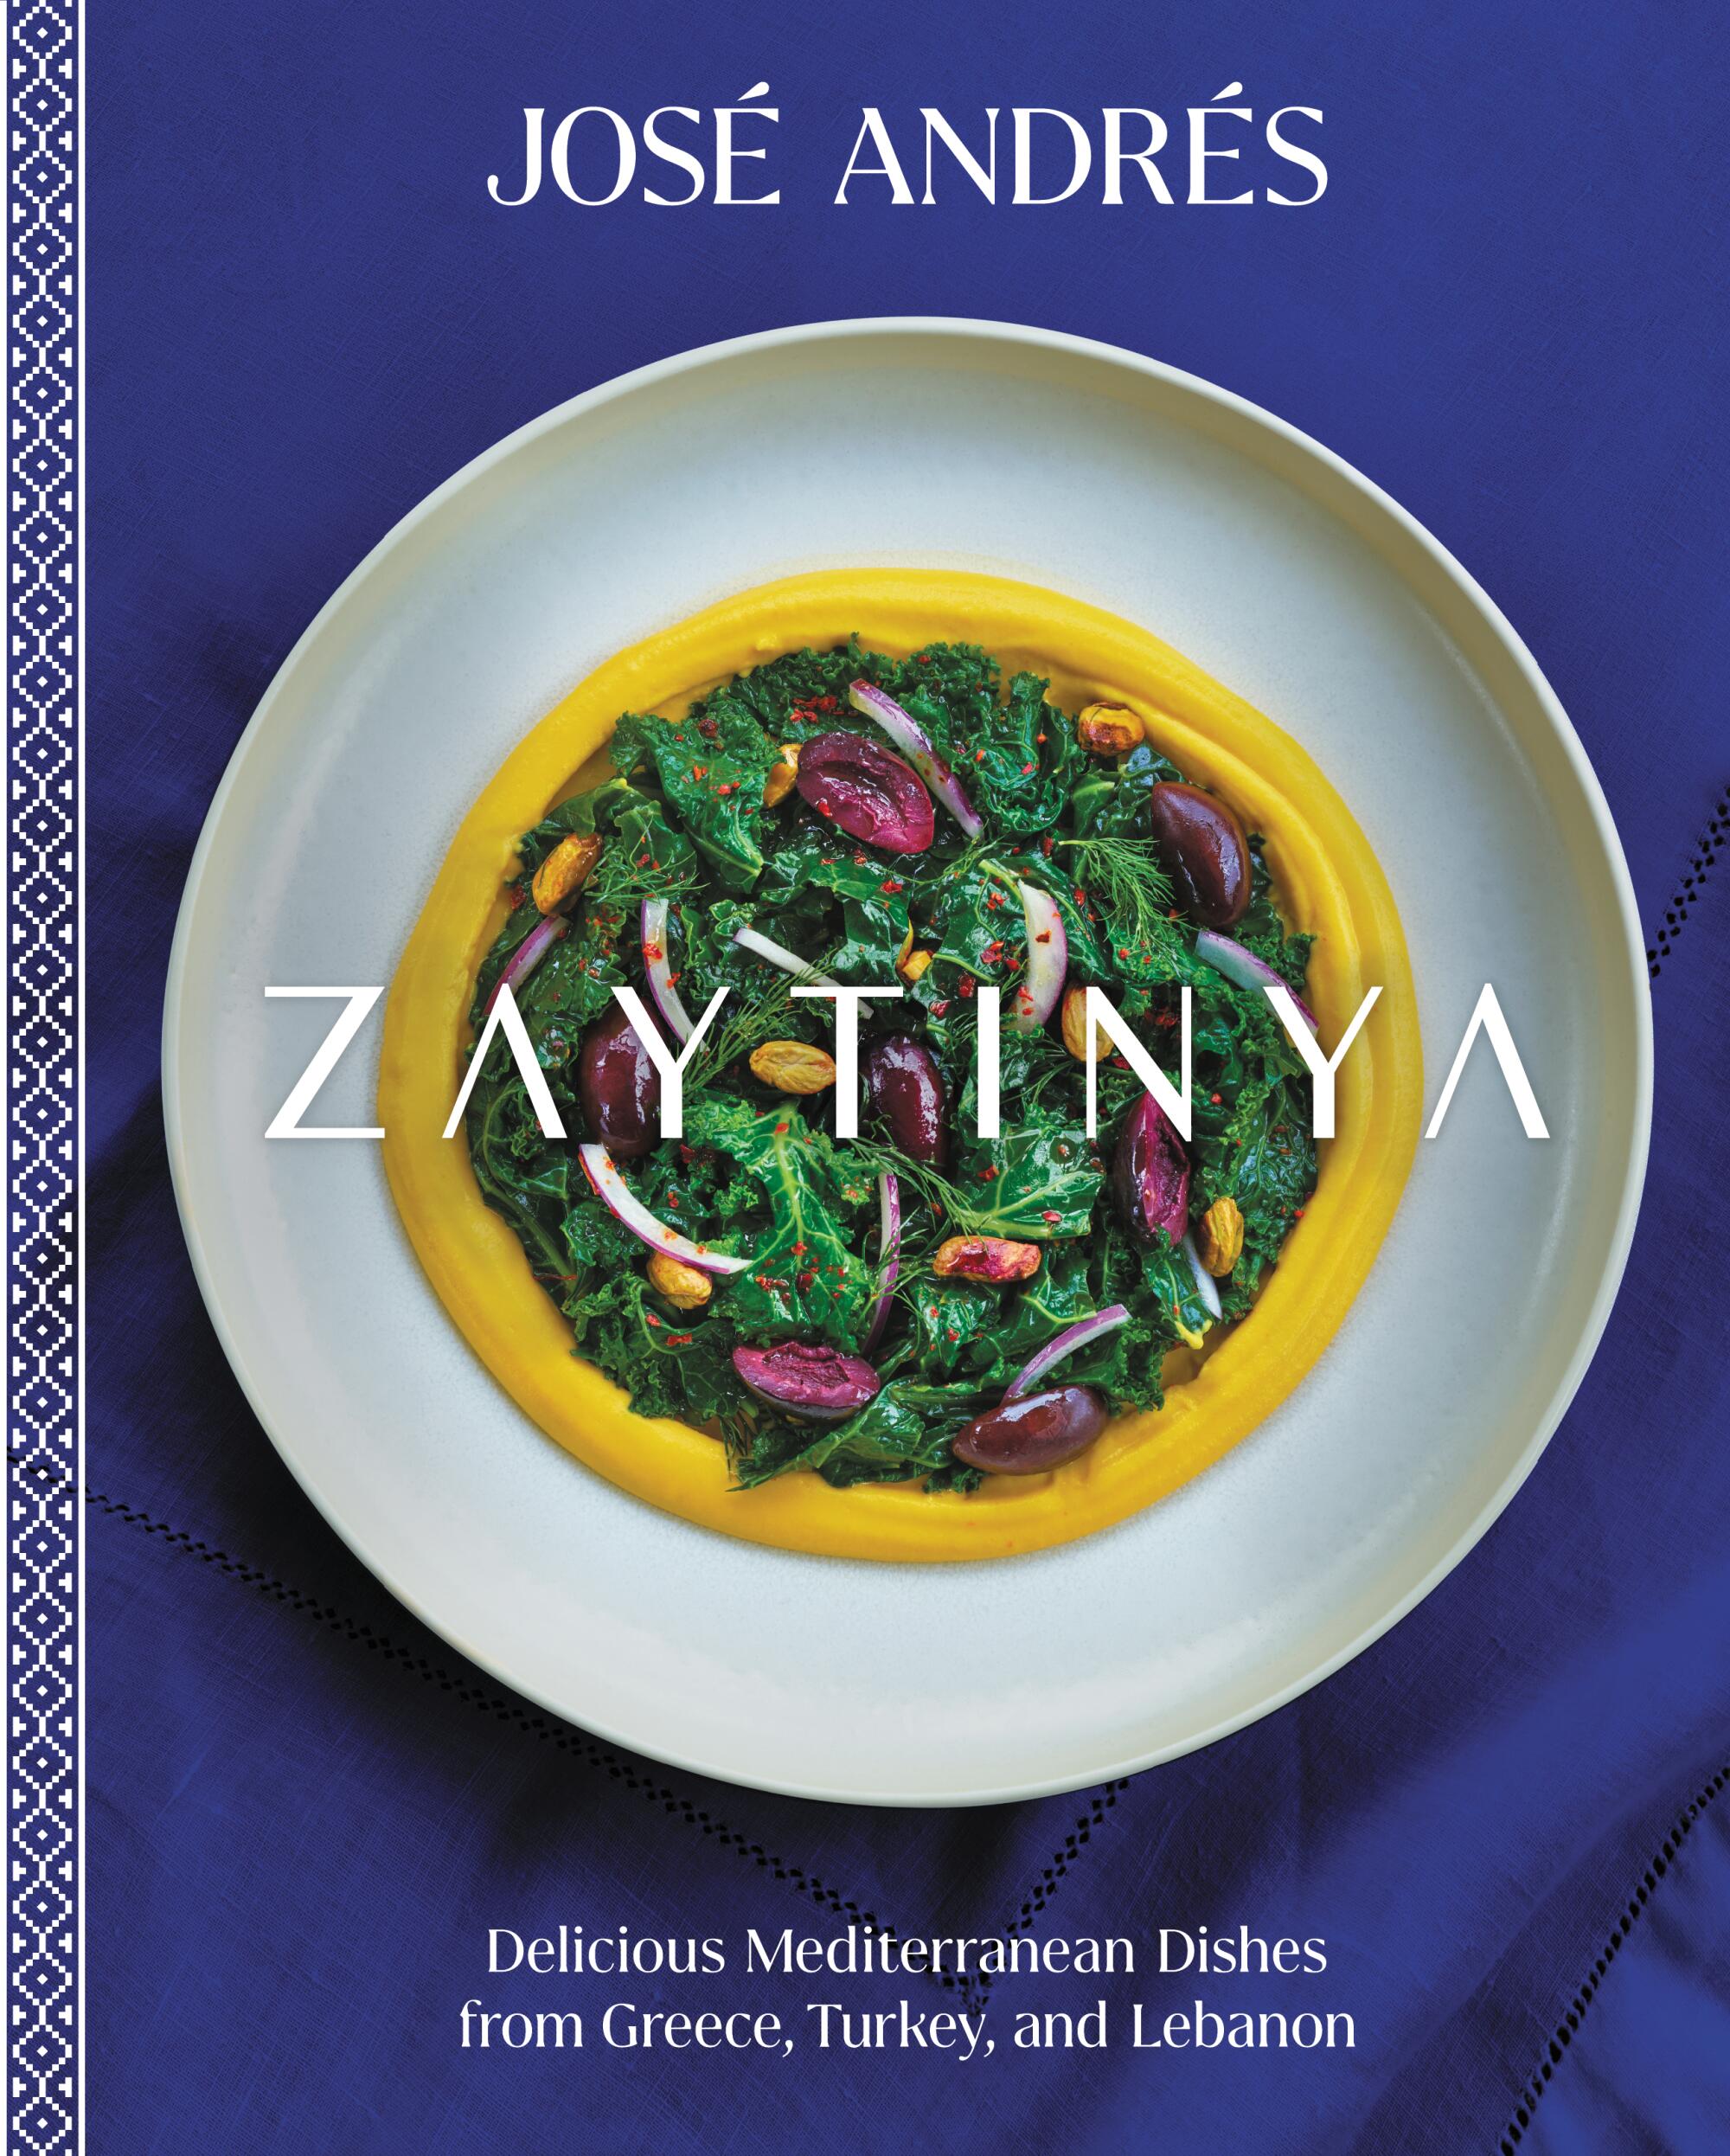 A photo of the cover of the Zaytinya cookbook: Dark blue with greens atop a yellow spread at the center of the book.